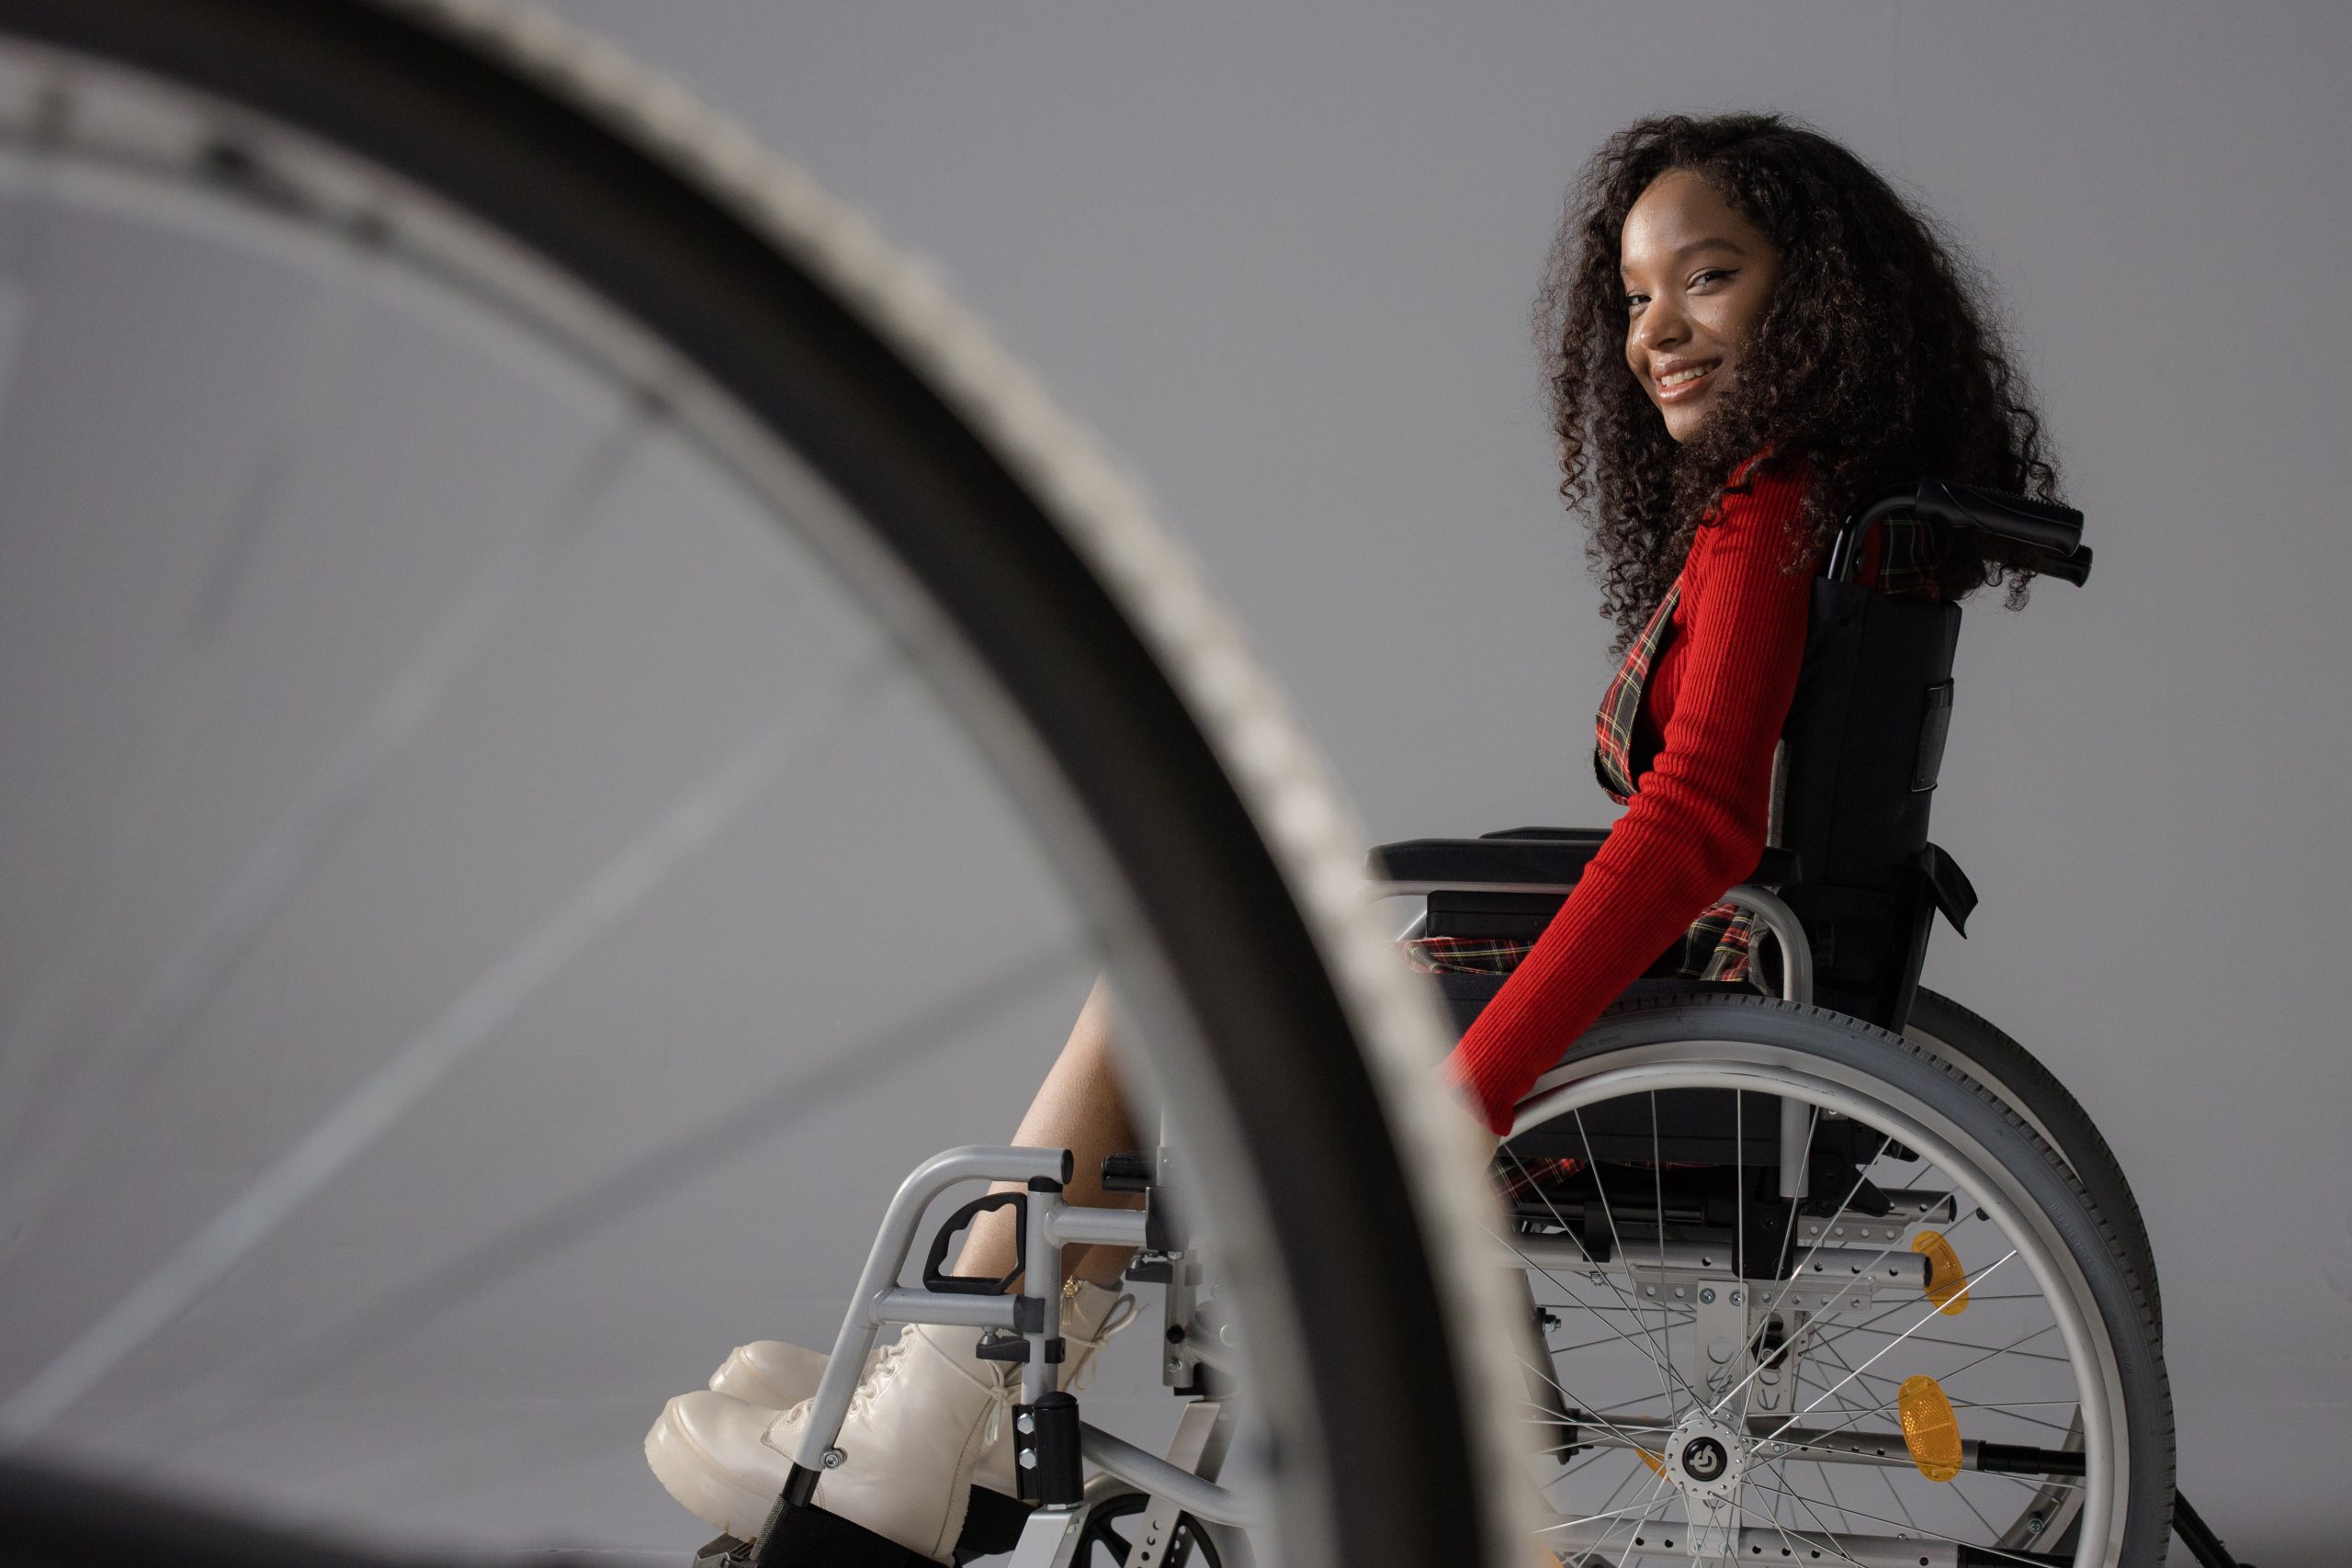 A young Black girl uses a wheelchair against a grey backdrop. She is smiling and wearing a red long sleeved top